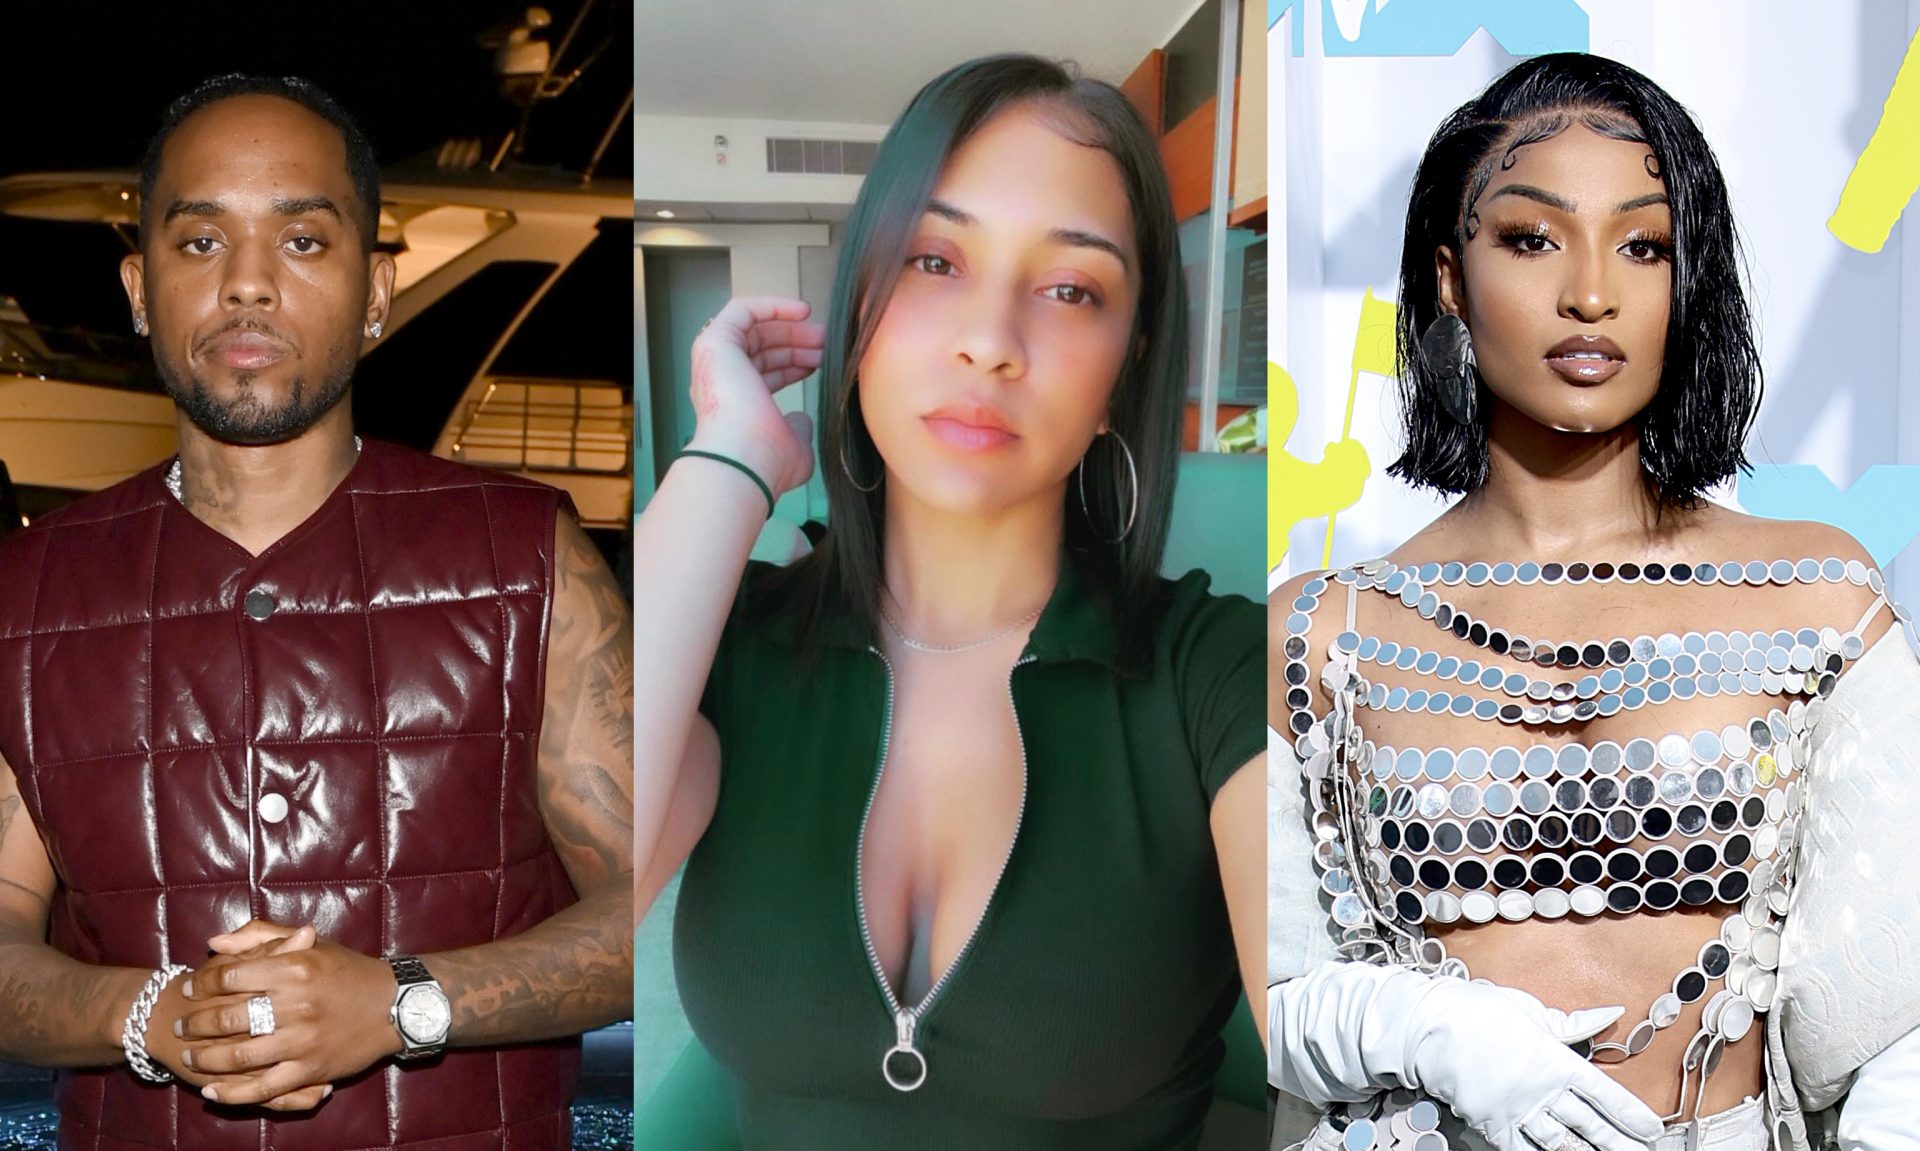 London On Da Track Says Daughter's Mother Scripted Accusations Against Shenseea's Son, Cease-And-Desist Sent To Eboni